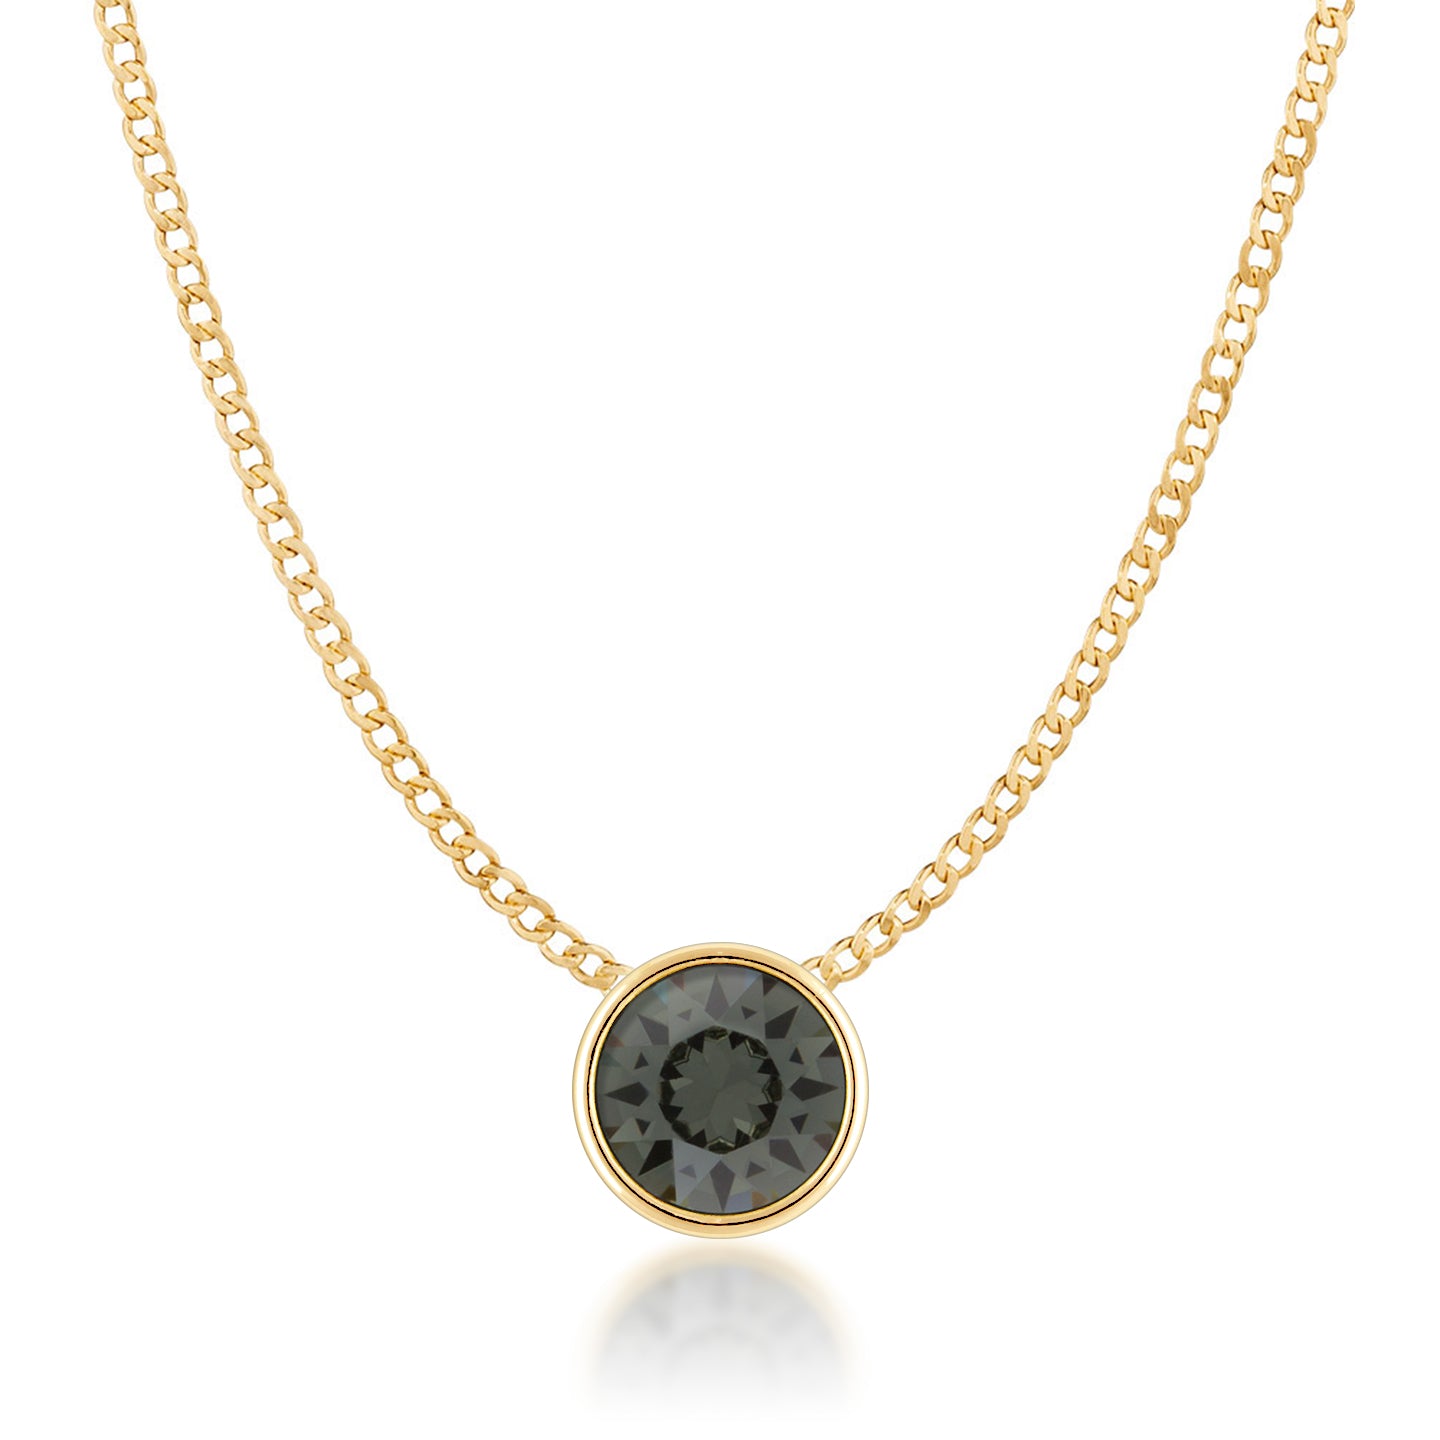 Harley Small Pendant Necklace with Black Diamond Round Crystals from Swarovski Gold Plated - Ed Heart